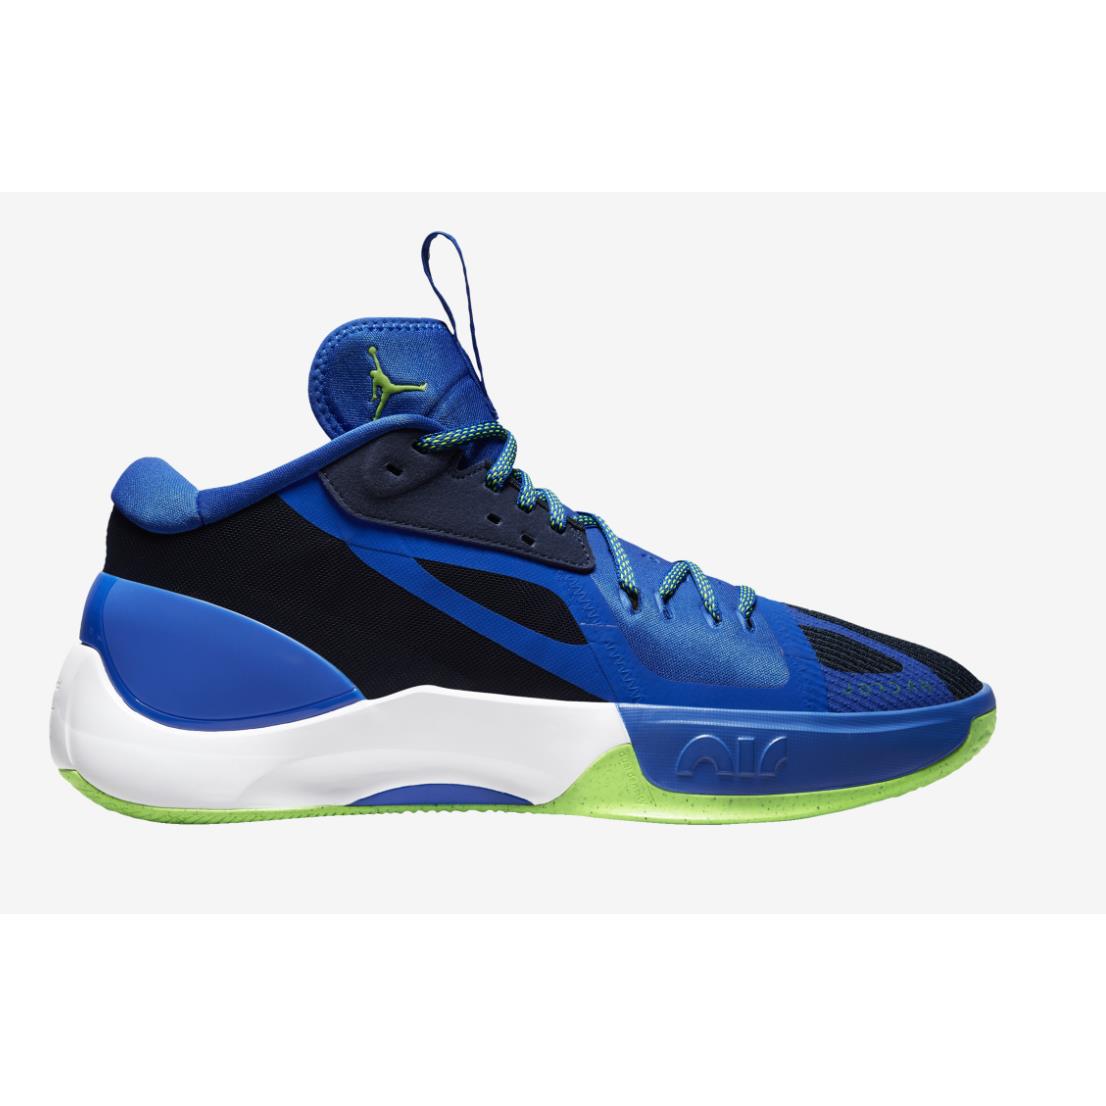 Nike Air Jordan Zoom Separate Navy Green Blue All Sizes DH0249-400 Basketball Shoes